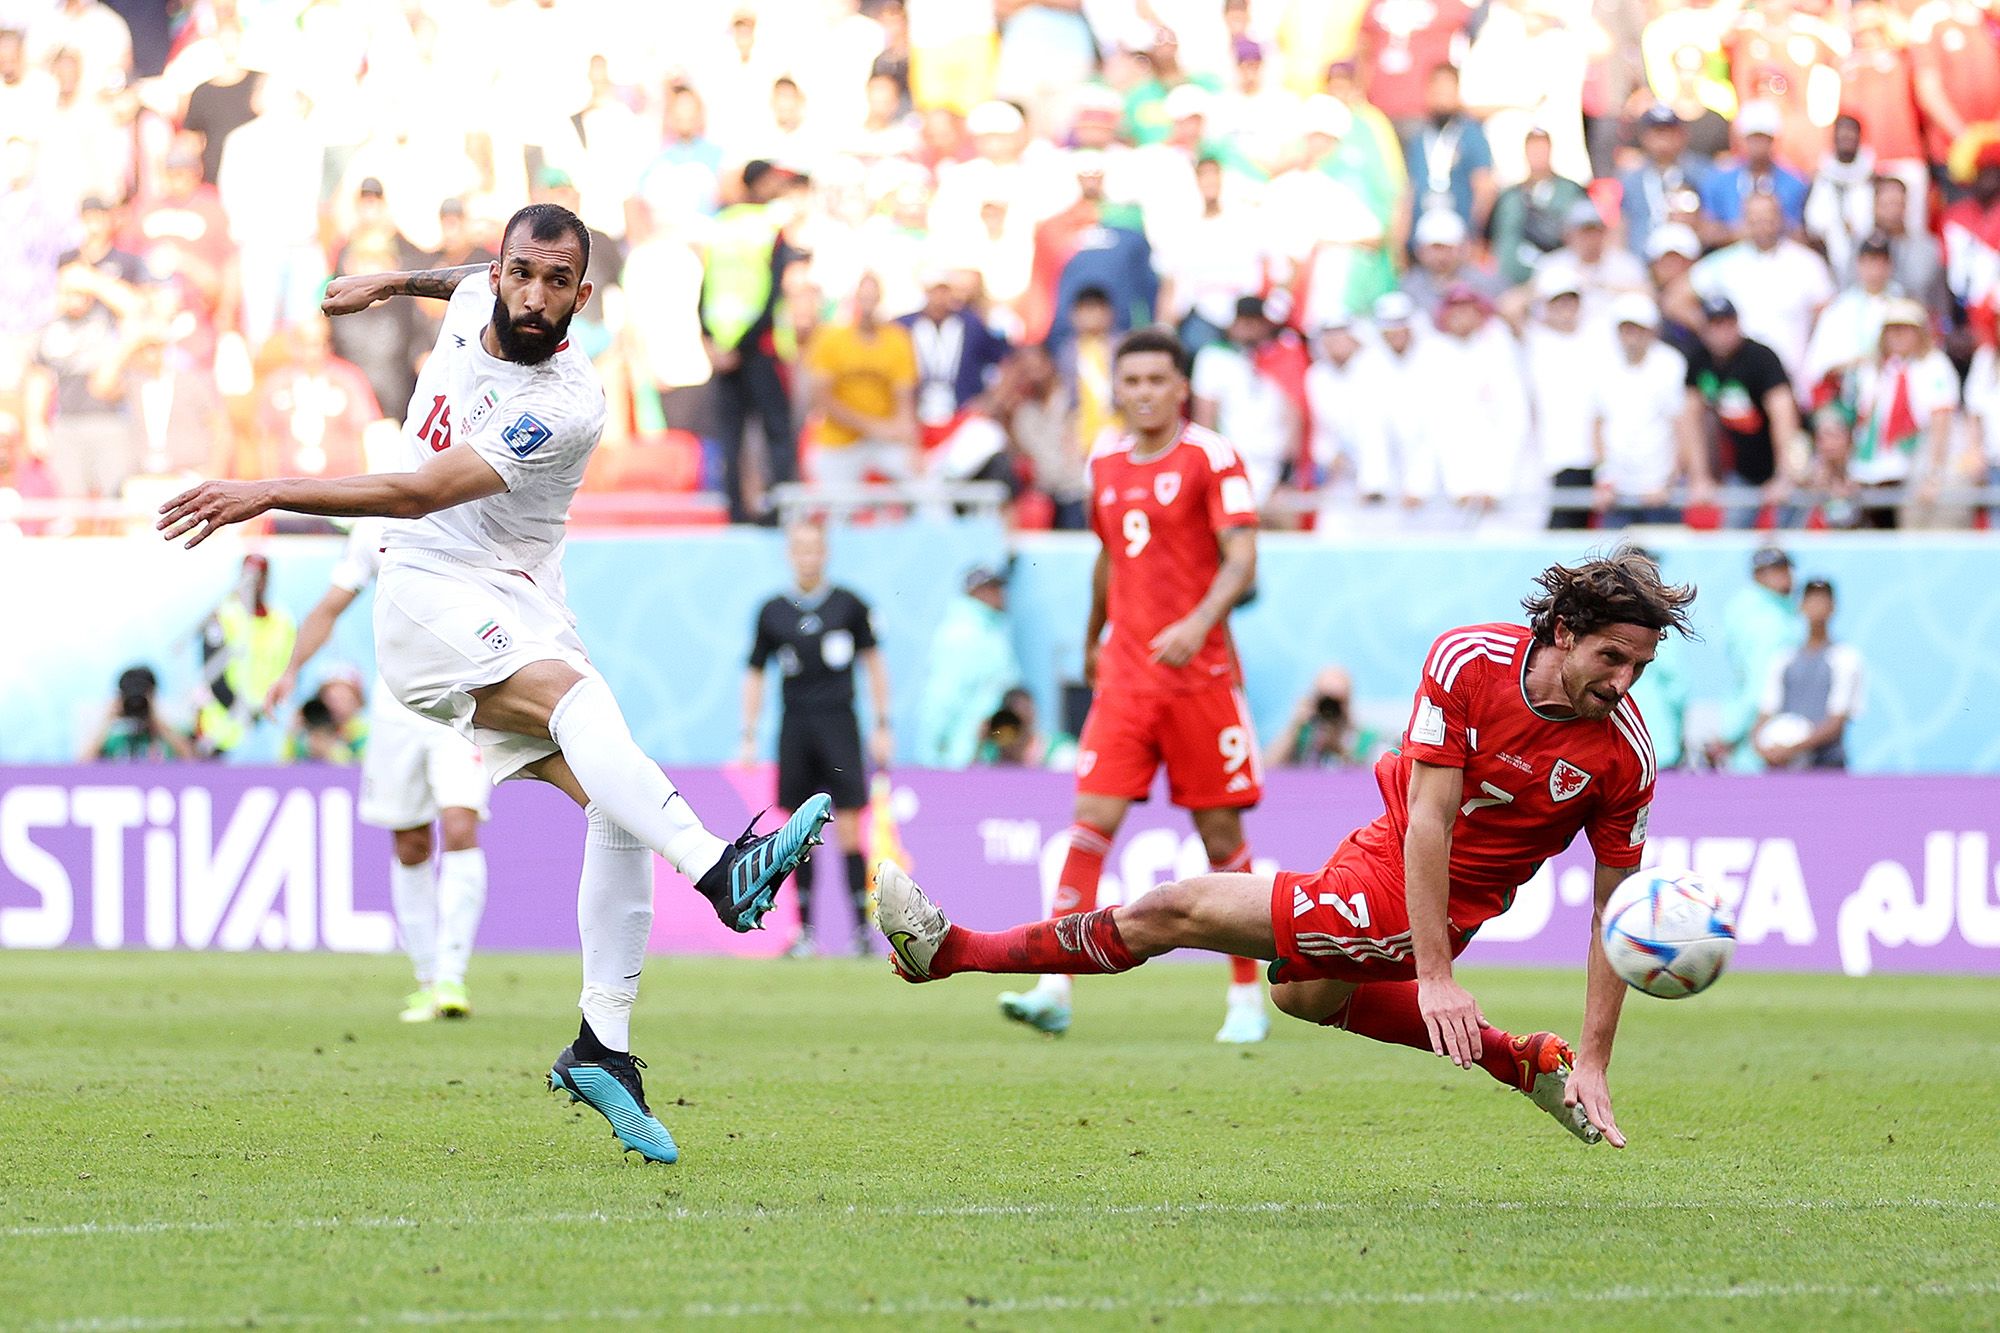 Iran resurrected in Doha and caught their first win at World Cup 2022, leaving Gareth Bale's Wales with one foot out of the door of the competition